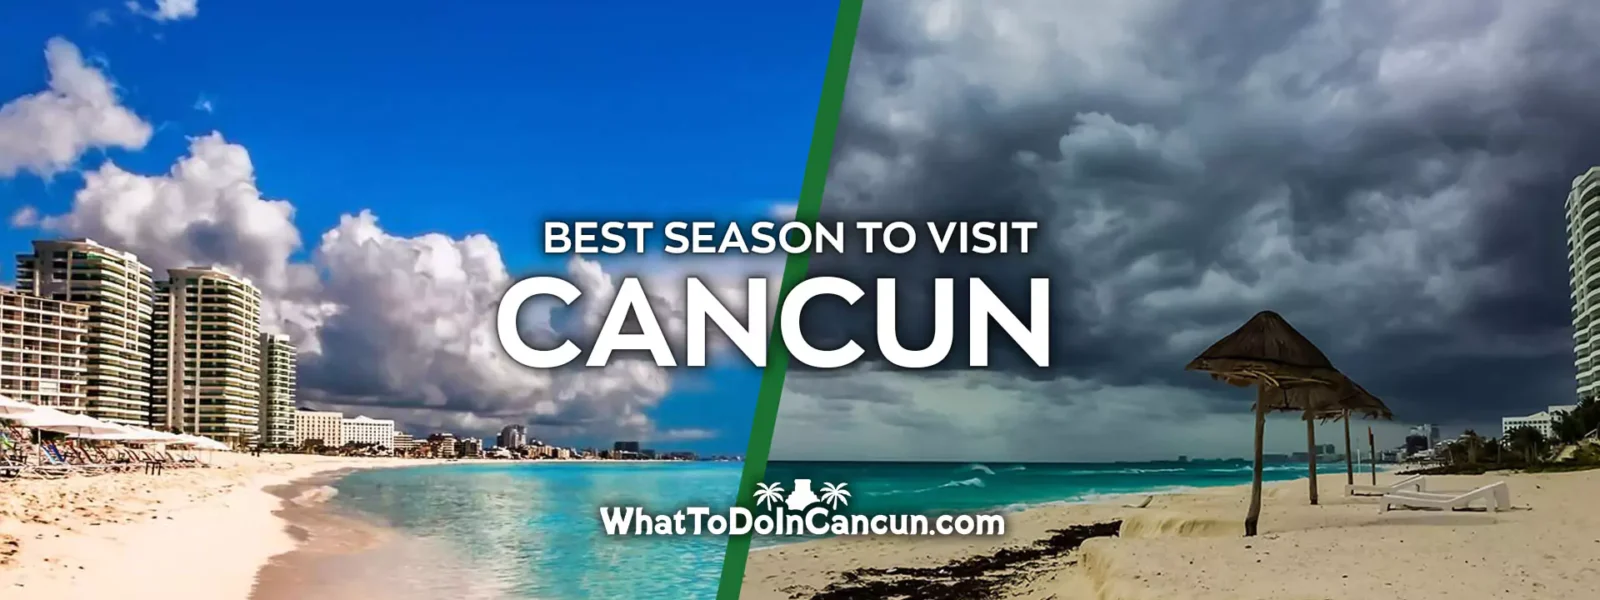 the-best-season-to-visit-cancun